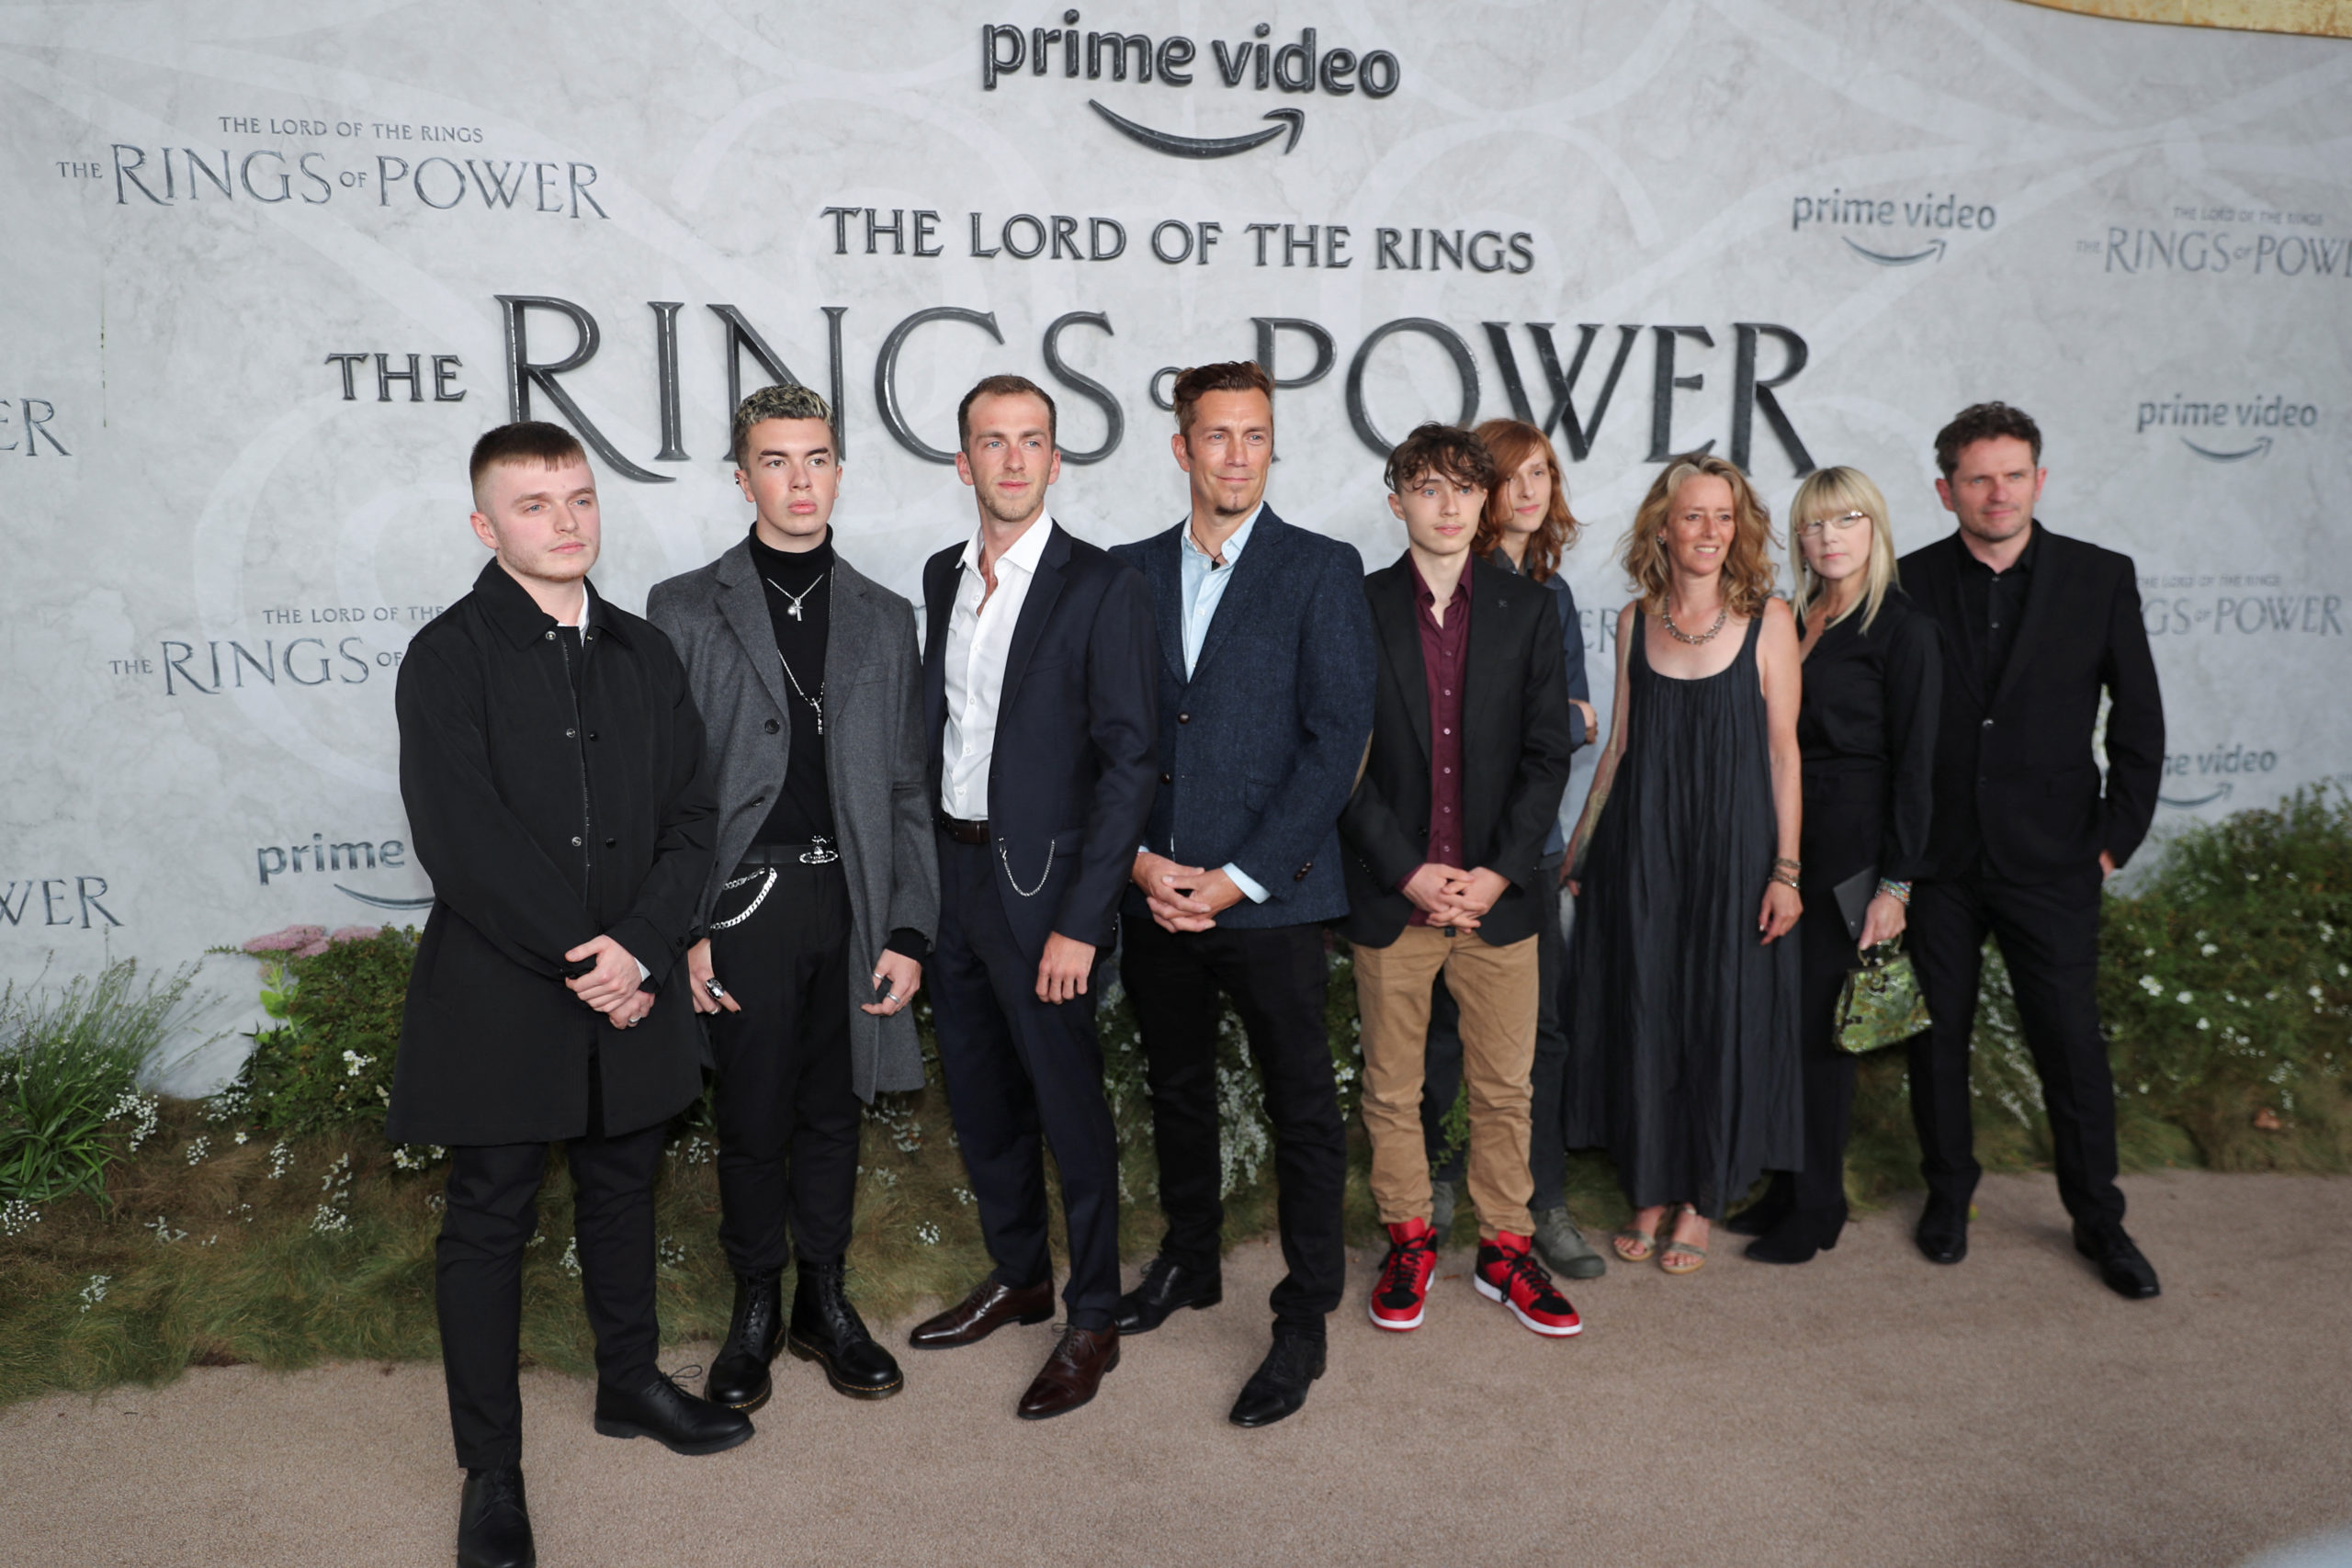 Royd Tolkien and guests arrive at the global premiere of The Lord of the Rings: The Rings of Power in London, Britain, August 30, 2022. REUTERS/May James